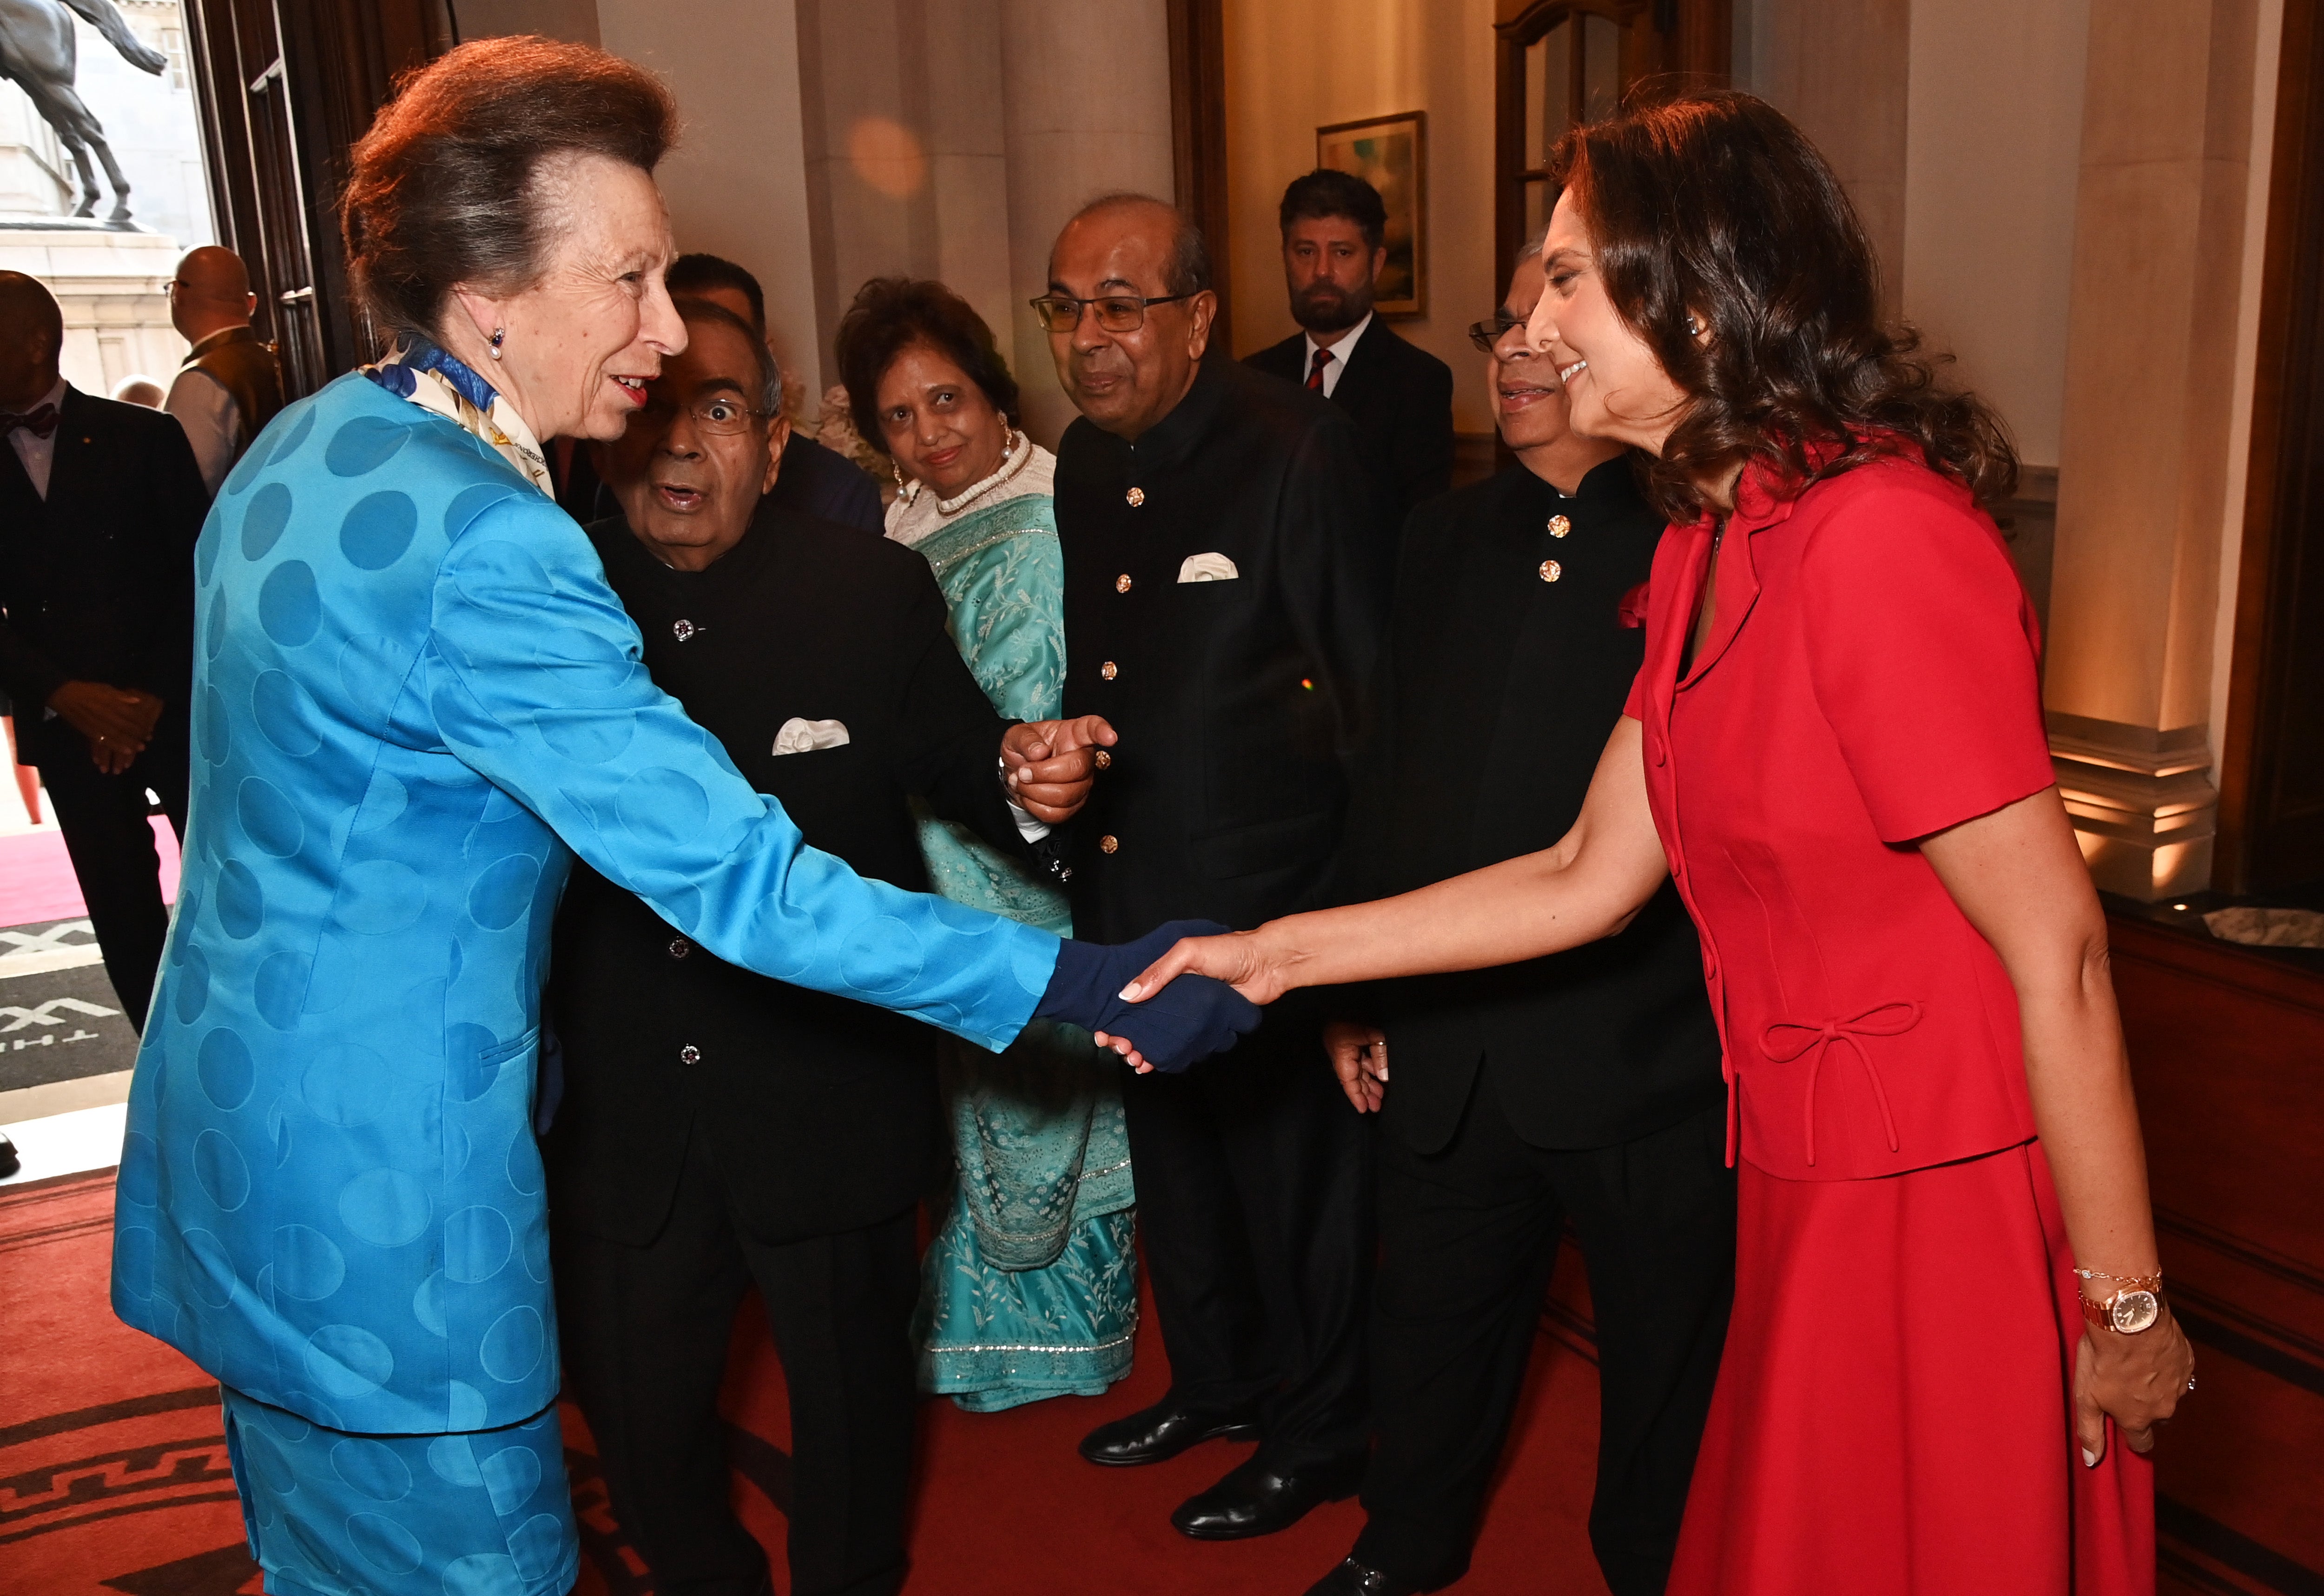 Princess Anne shakes hands with Gopichand P Hinduja, Chairperson of the Hinduja Group, at the inauguration